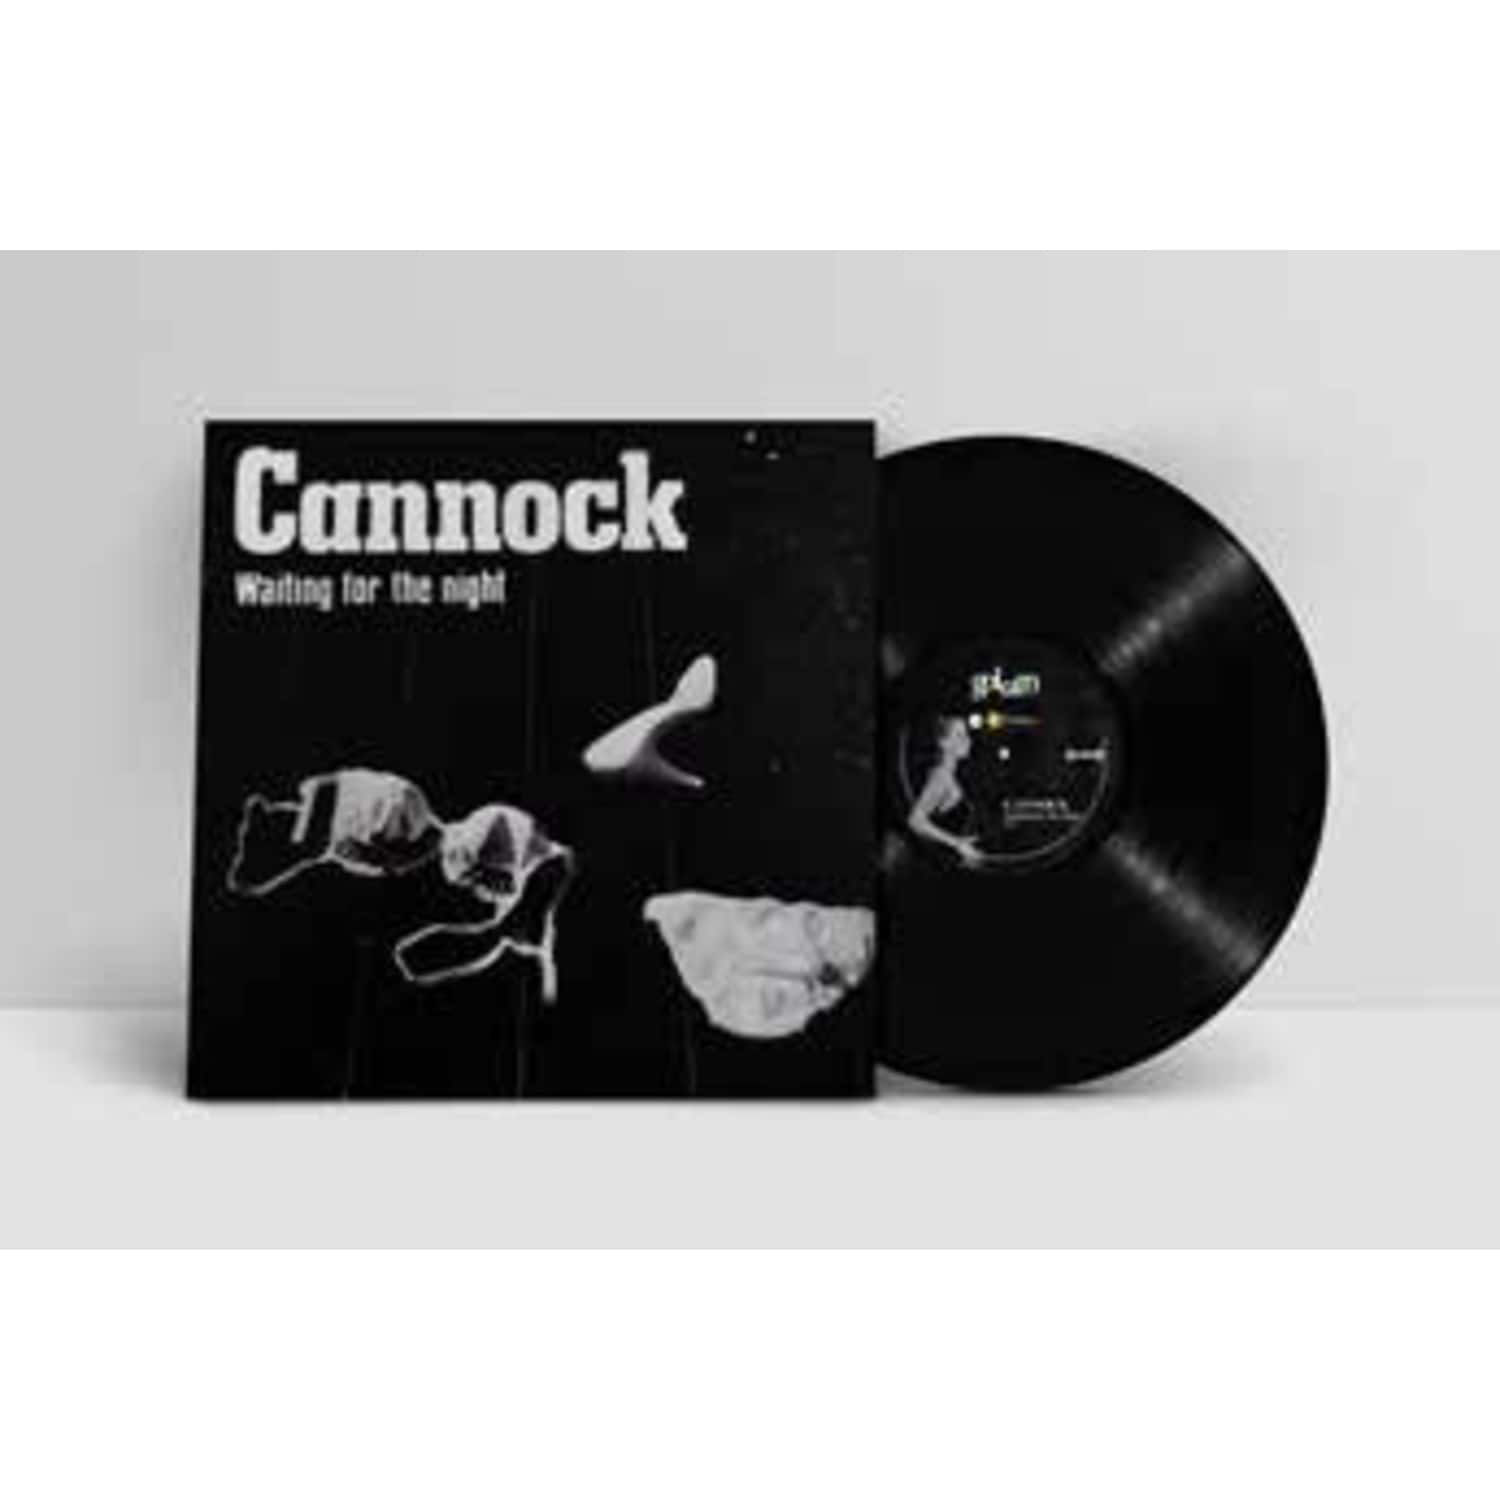 Cannock - WAITING FOR THE NIGHT 